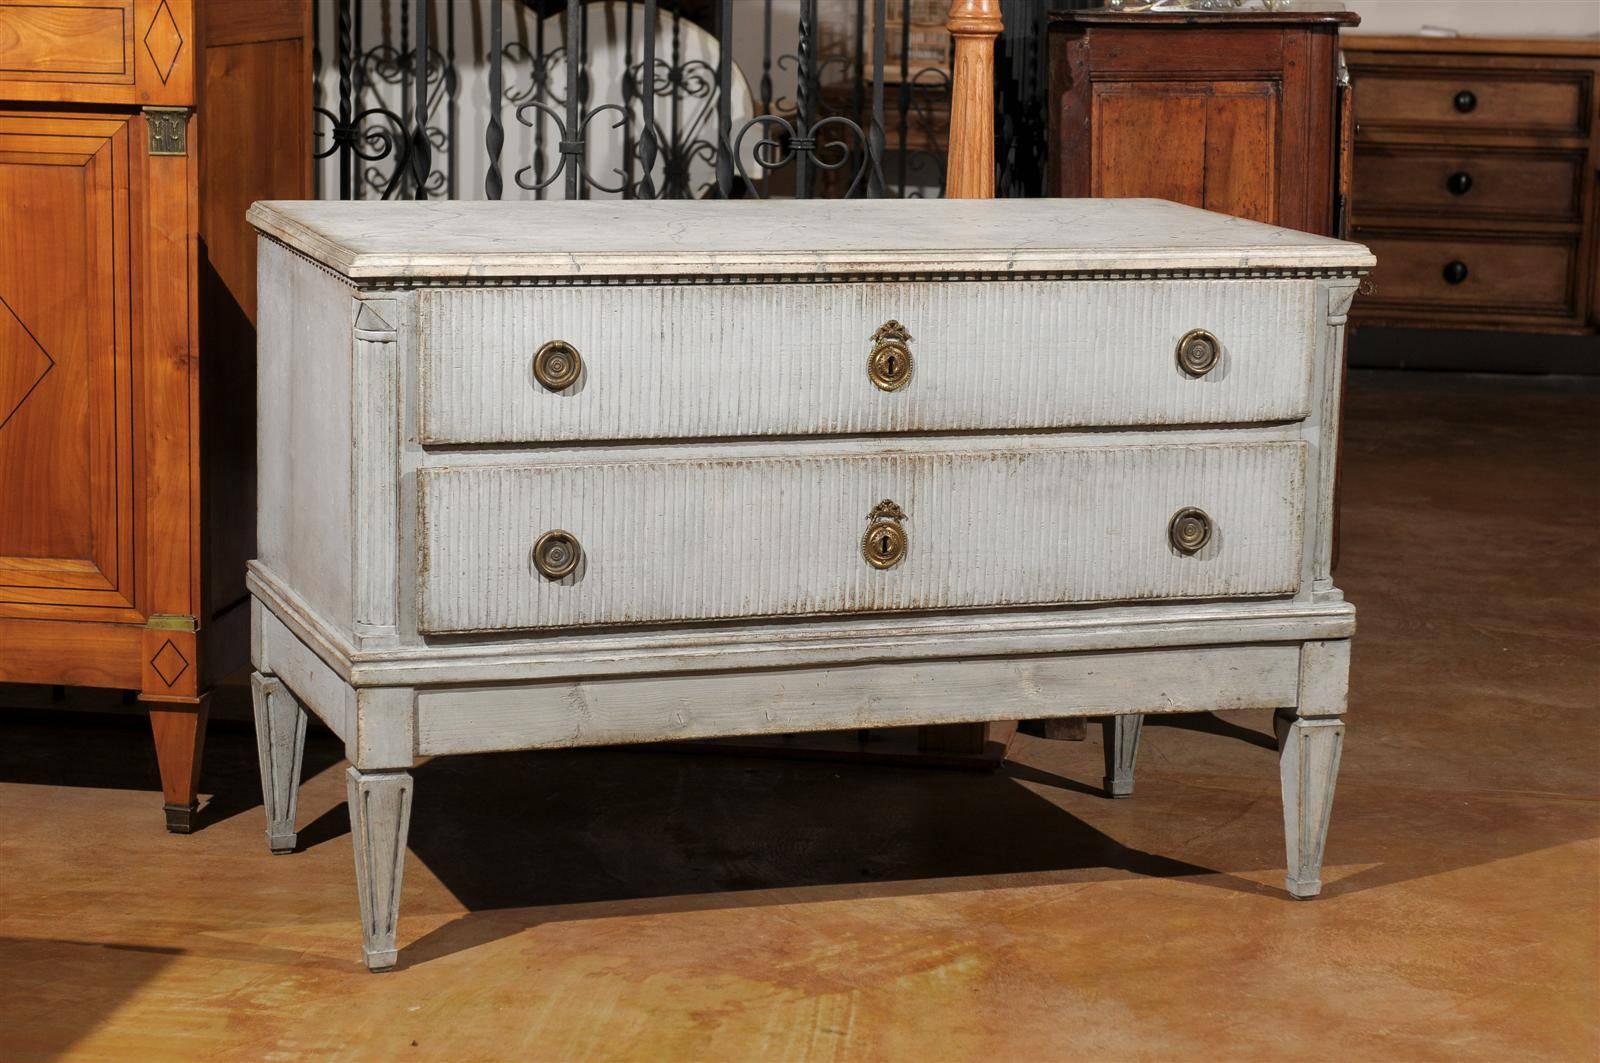 A Swedish period Gustavian painted wood two-drawer commode with reeded motifs and tapered legs from the late 18th century. This exquisite Swedish chest features a rectangular marbleized top with molded edges, sitting above a discreet dentil molding